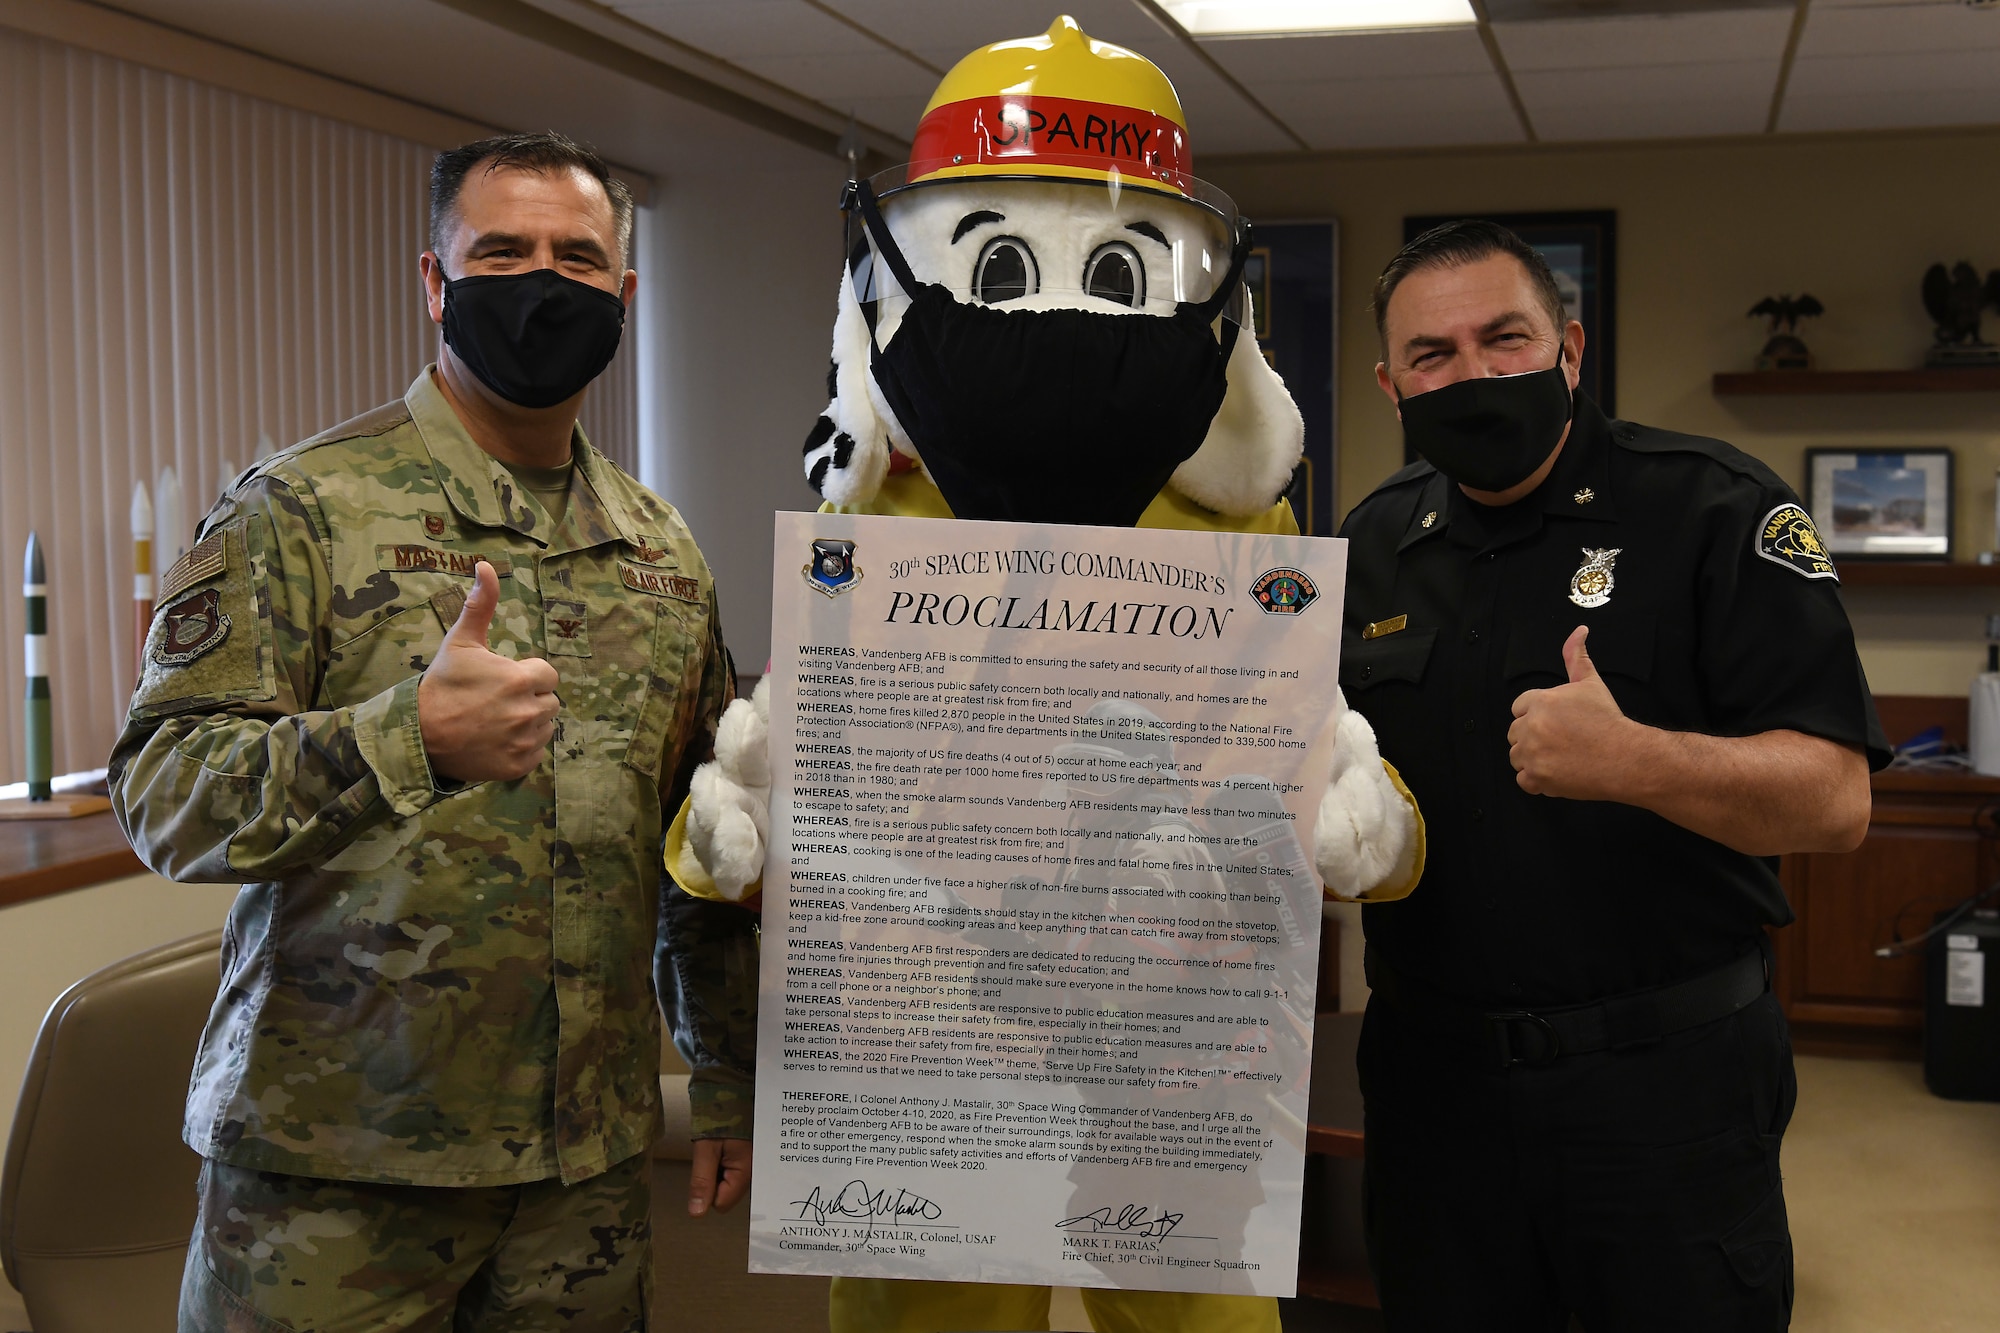 Col. Anthony Mastalir, 30th Space Wing commander, and Mark Farias, 30th Civil Engineer Squadron fire chief, and Sparky the Fire Dog pose with the signed 2020 Fire Proclamation Oct. 5, 2020, at Vandenberg Air Force Base, Calif.